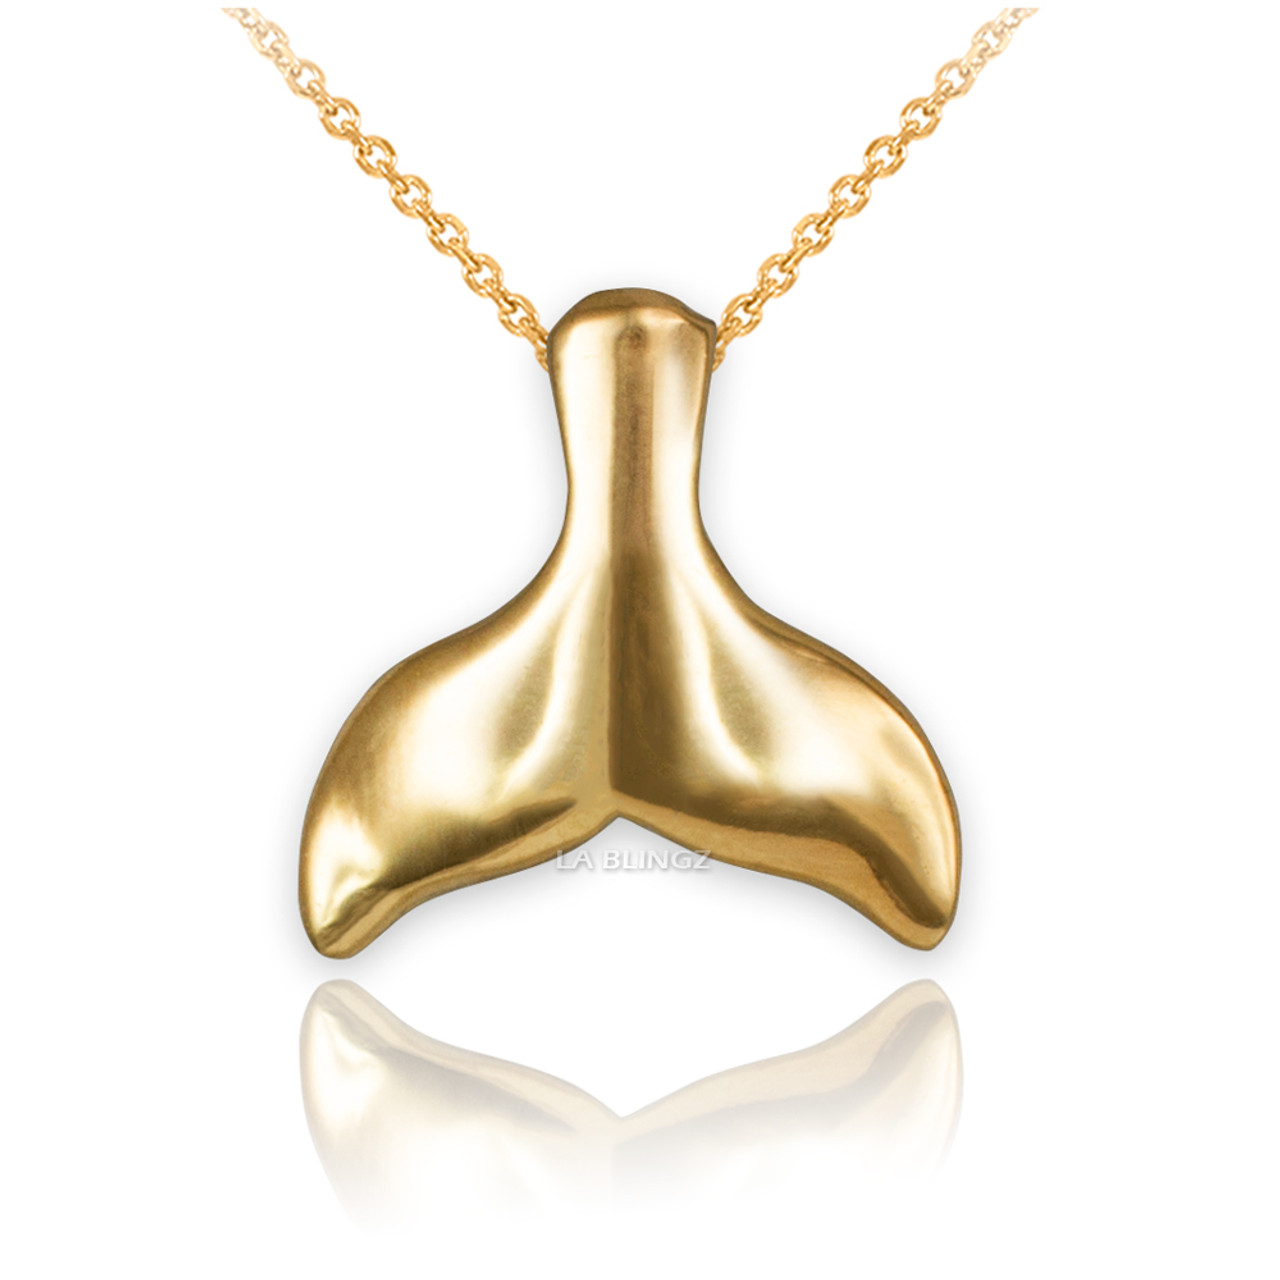 LA BLINGZ 14K Polished Rose Gold Whale Tail Necklace (16) : Clothing, Shoes  & Jewelry - Amazon.com